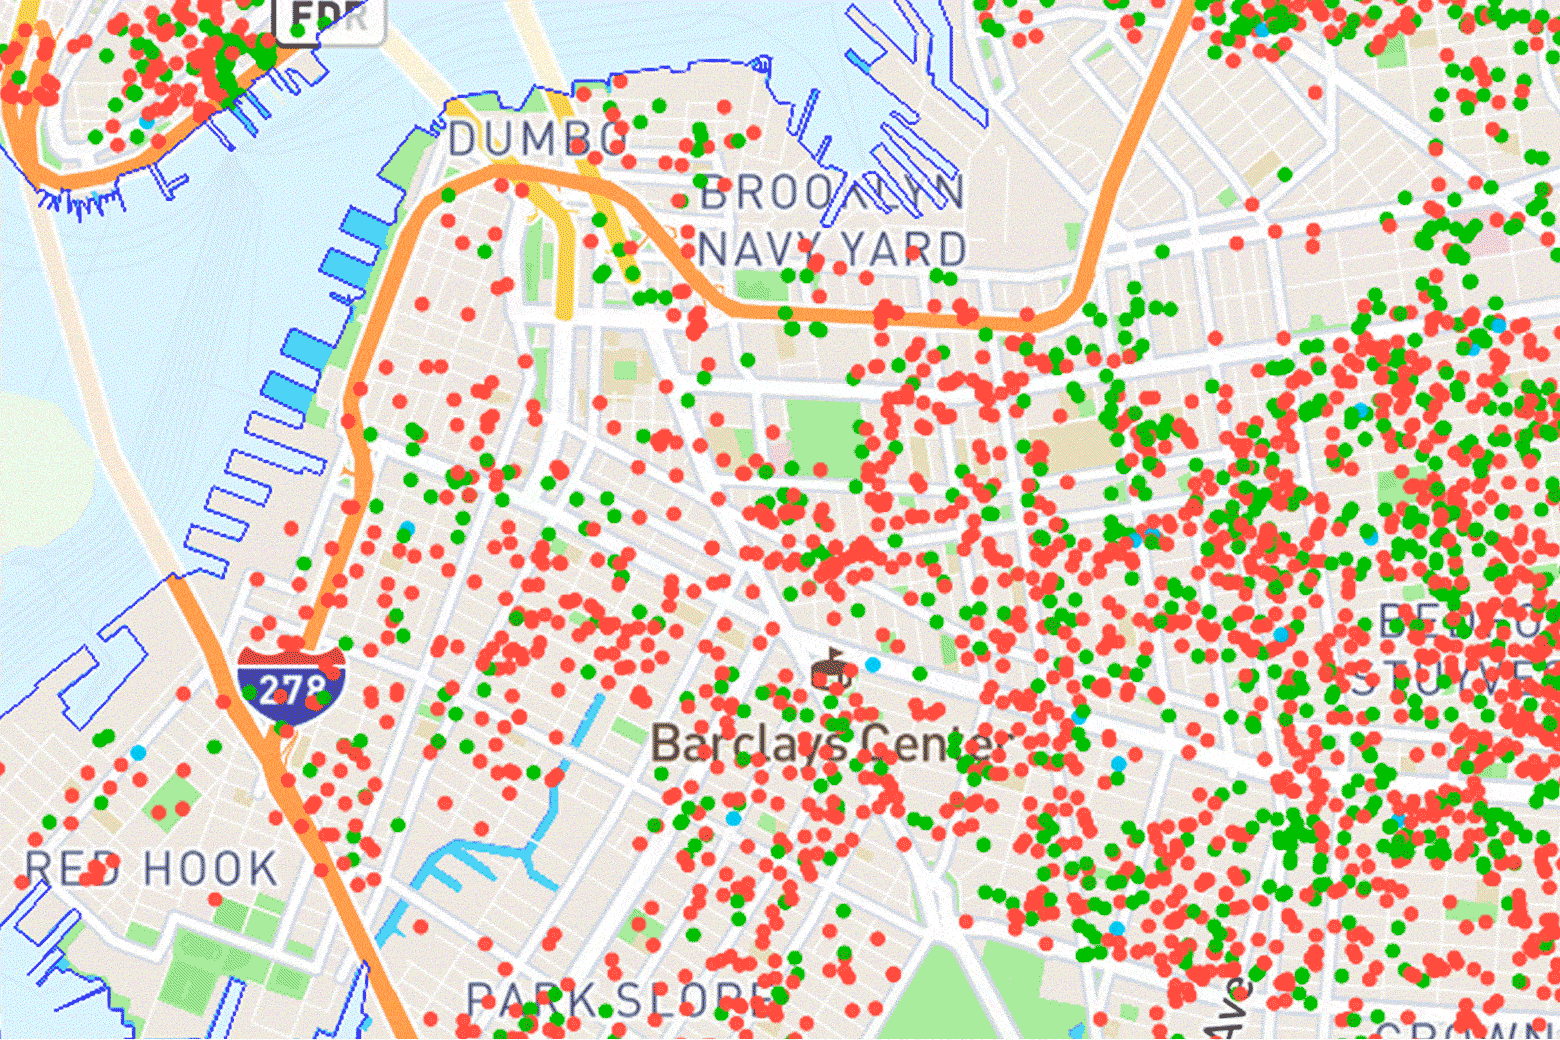 Two views of a map: one with many green and red dots, another with dramatically fewer dots altogether.